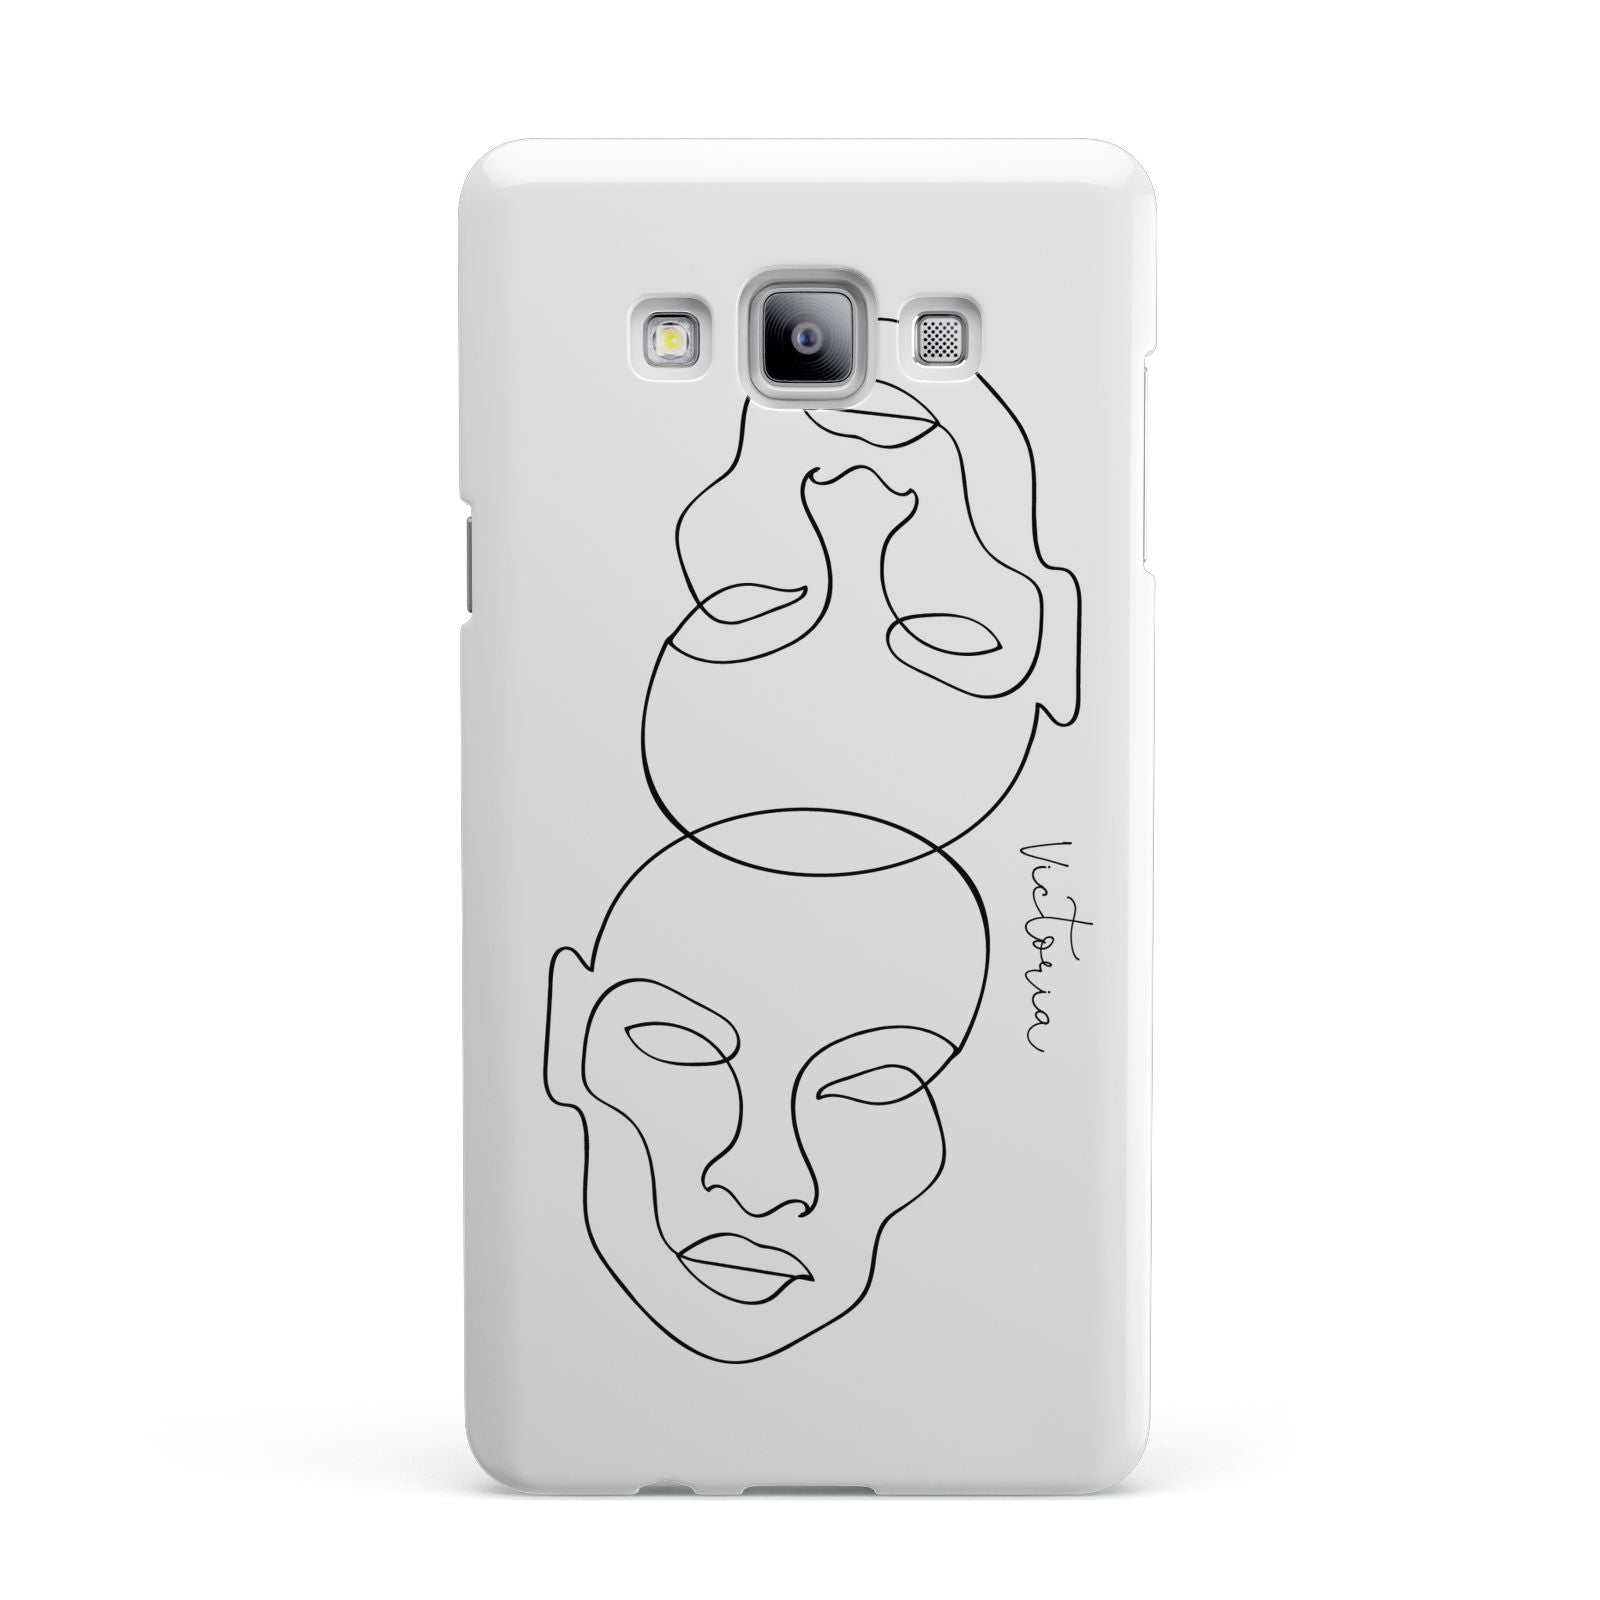 Personalised White Line Art Samsung Galaxy A7 2015 Case